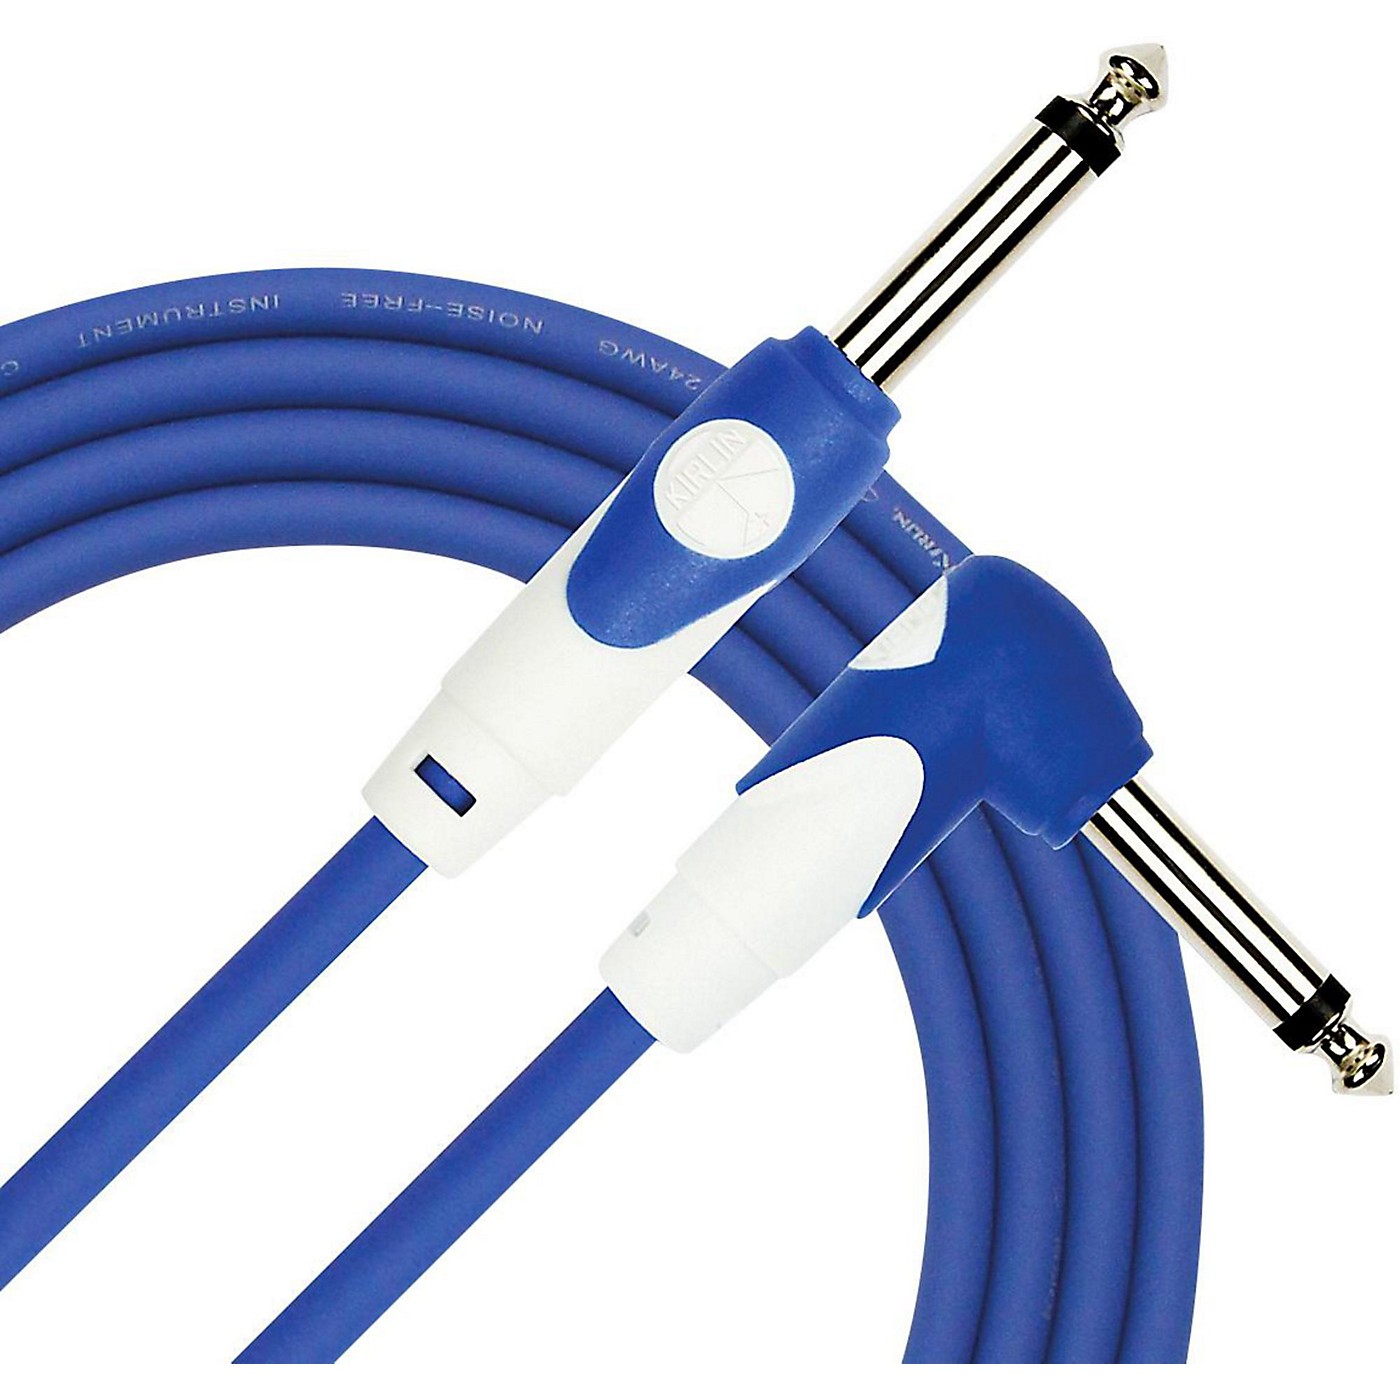 KIRLIN LightGear Straight to Right Angle Instrument Cable - 10 ft. with PVC Jacket thumbnail